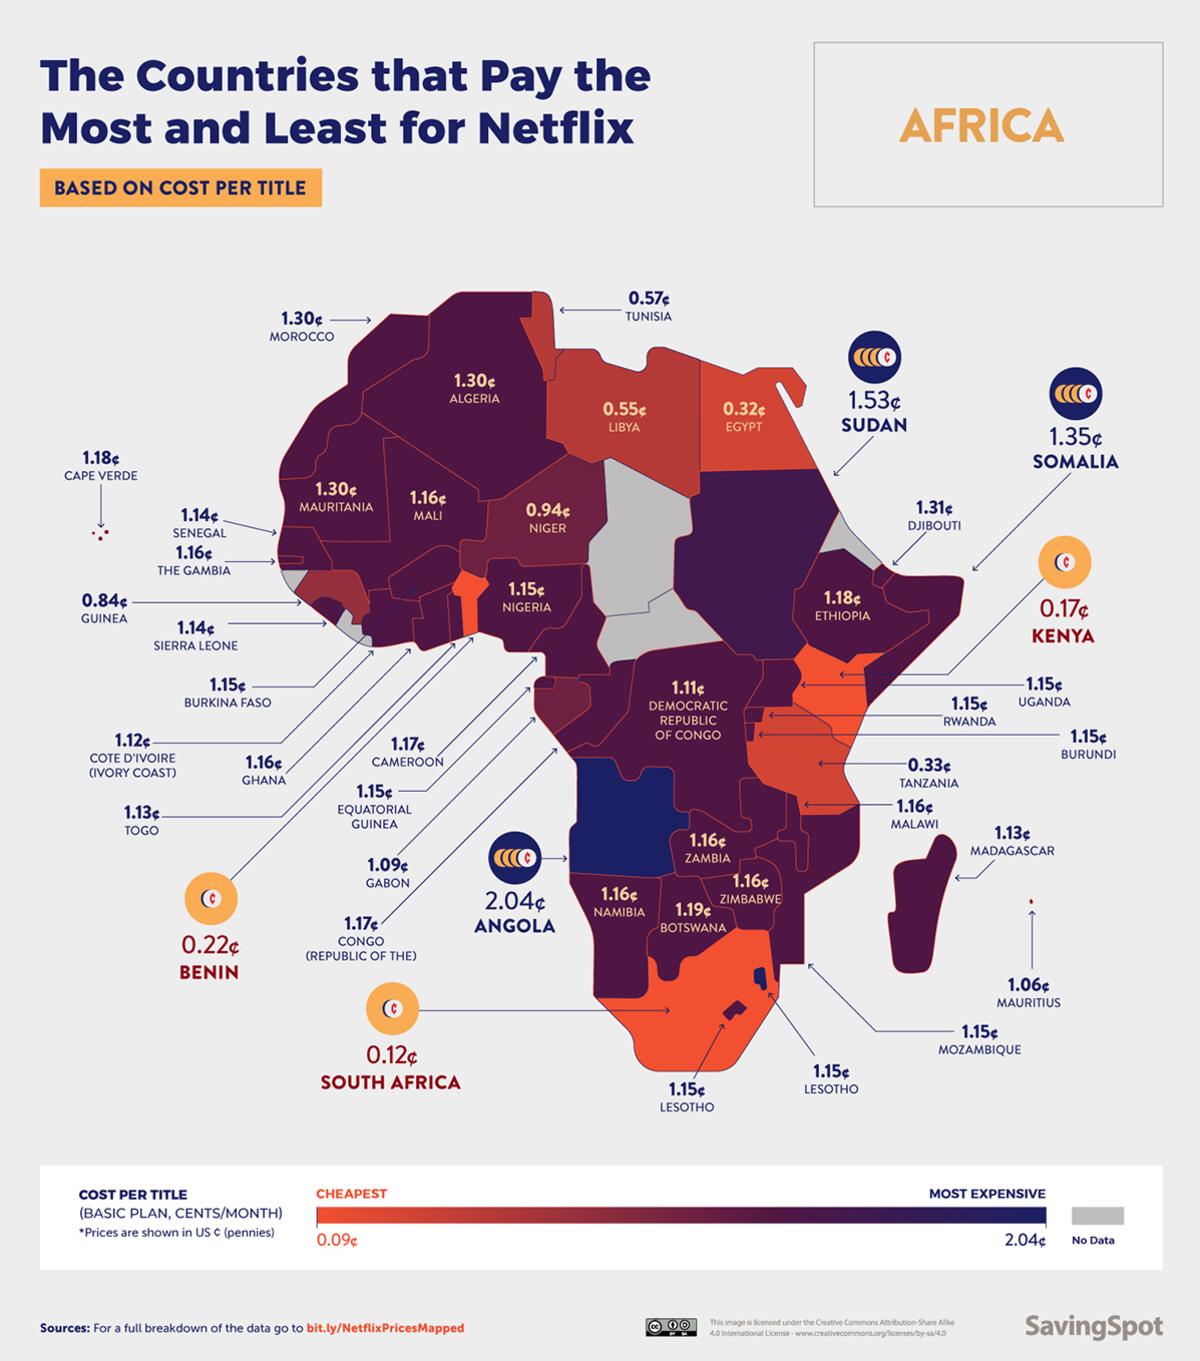 Netflix is far from affordable in Africa.